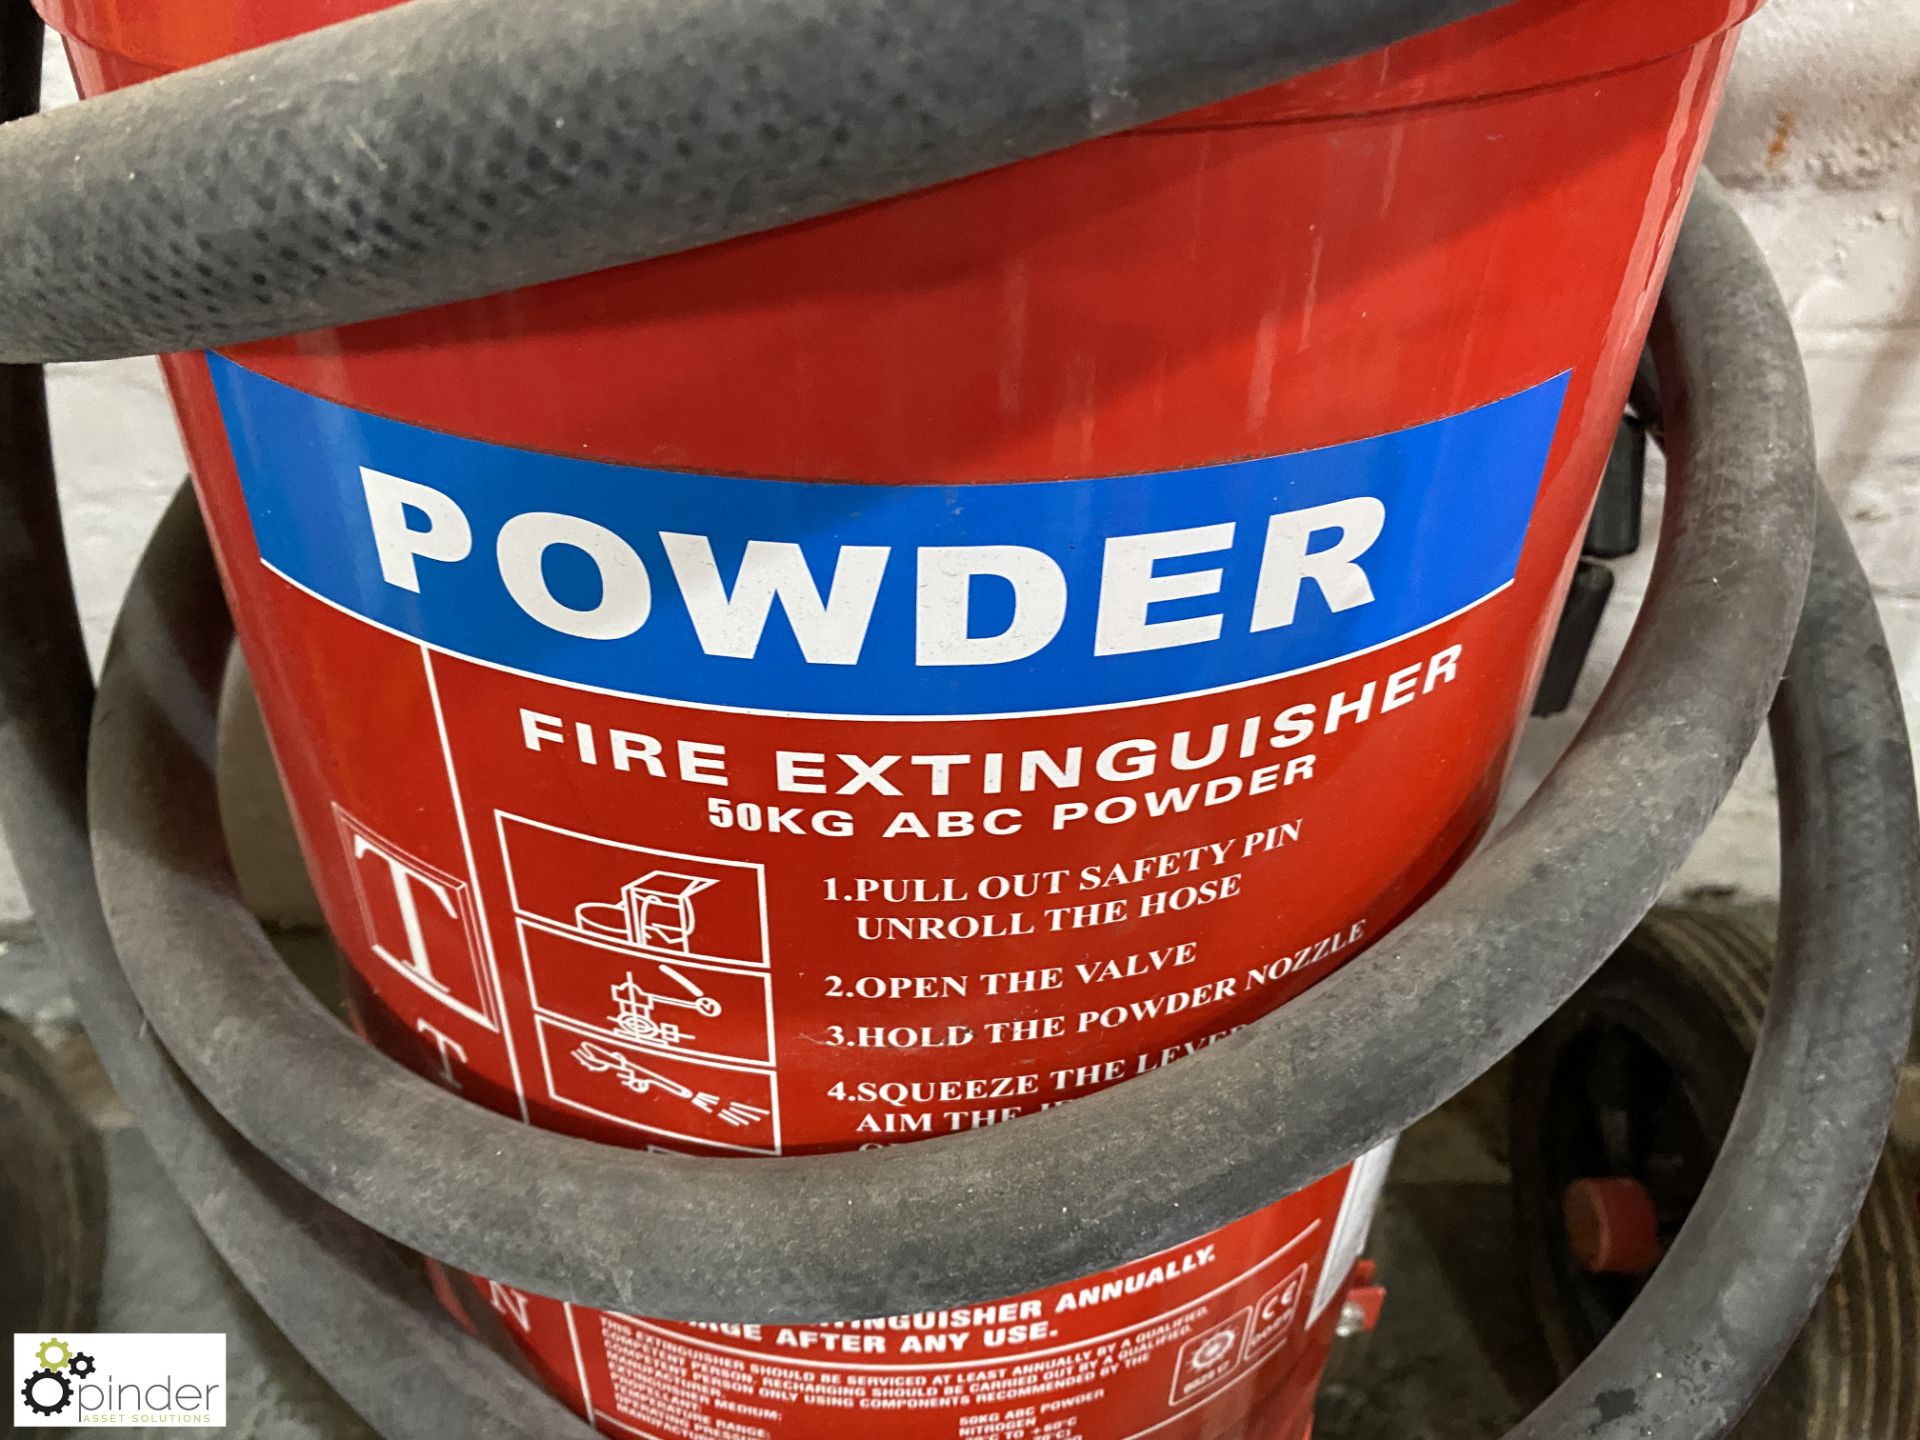 Powder ABC Fire Extinguishers, 50kg, with trolley - Image 2 of 3